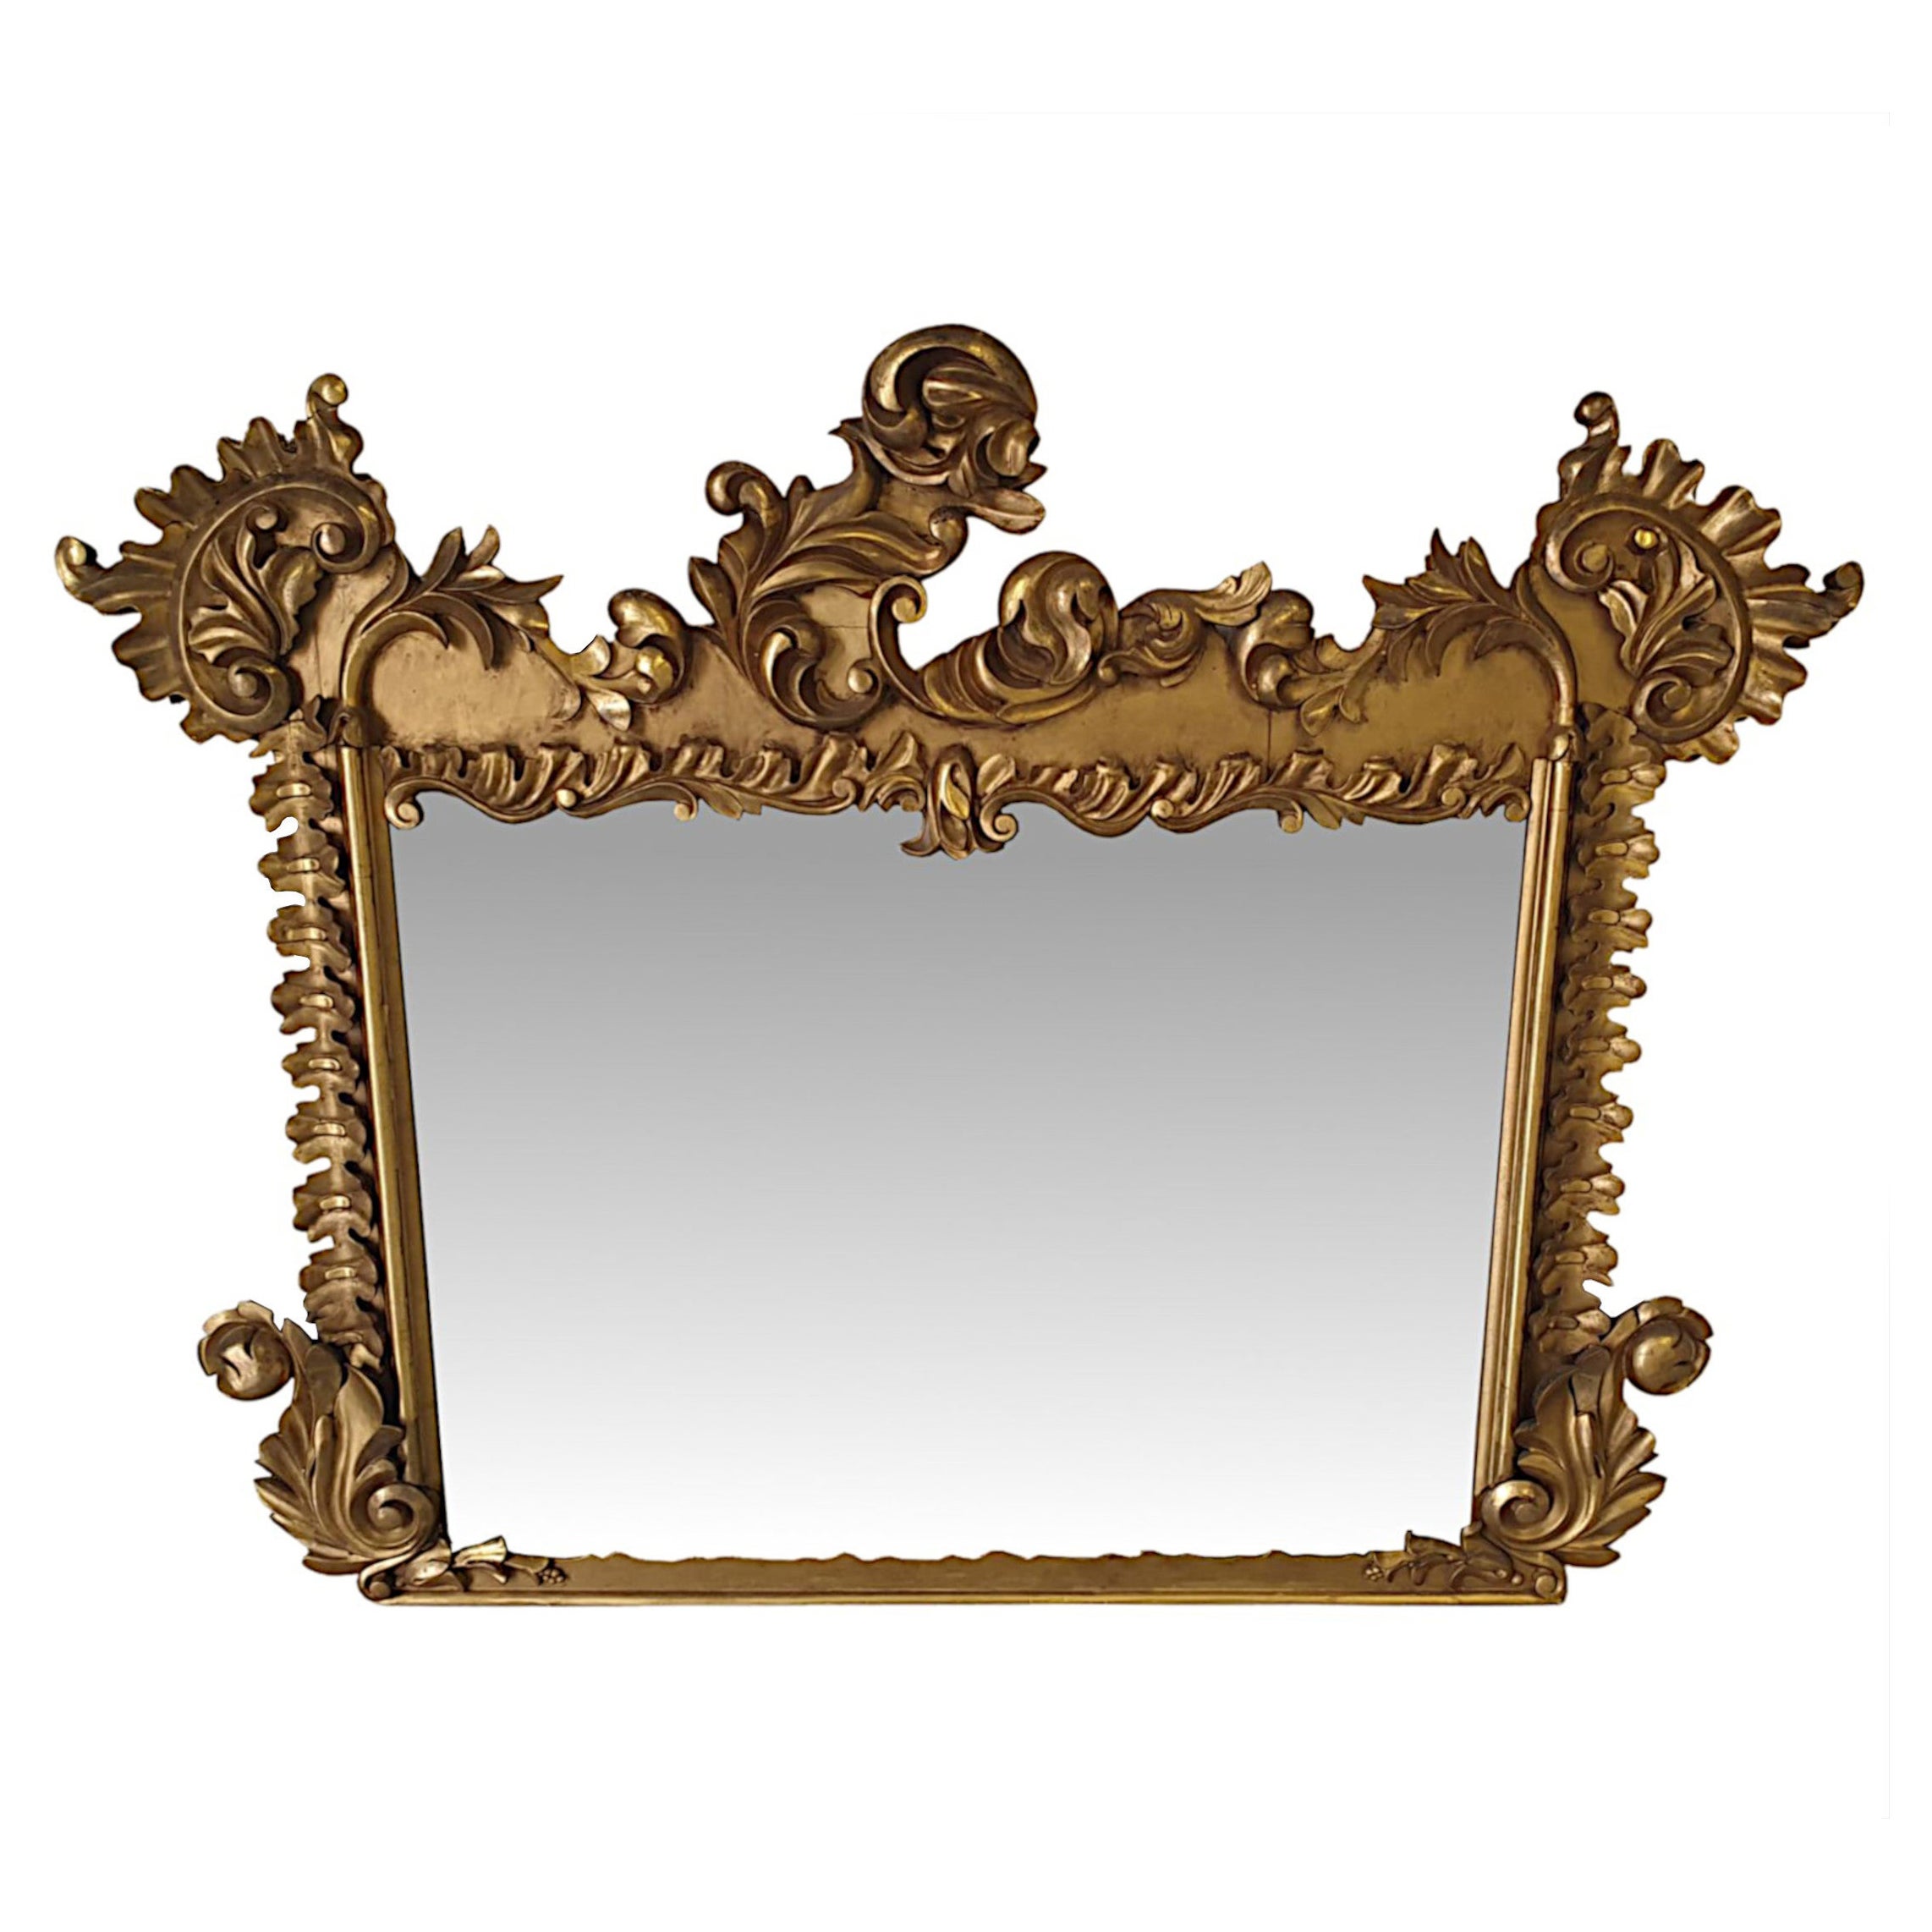 Very Fine Early 19th Century Irish William IV Giltwood Overmantle Mirror For Sale